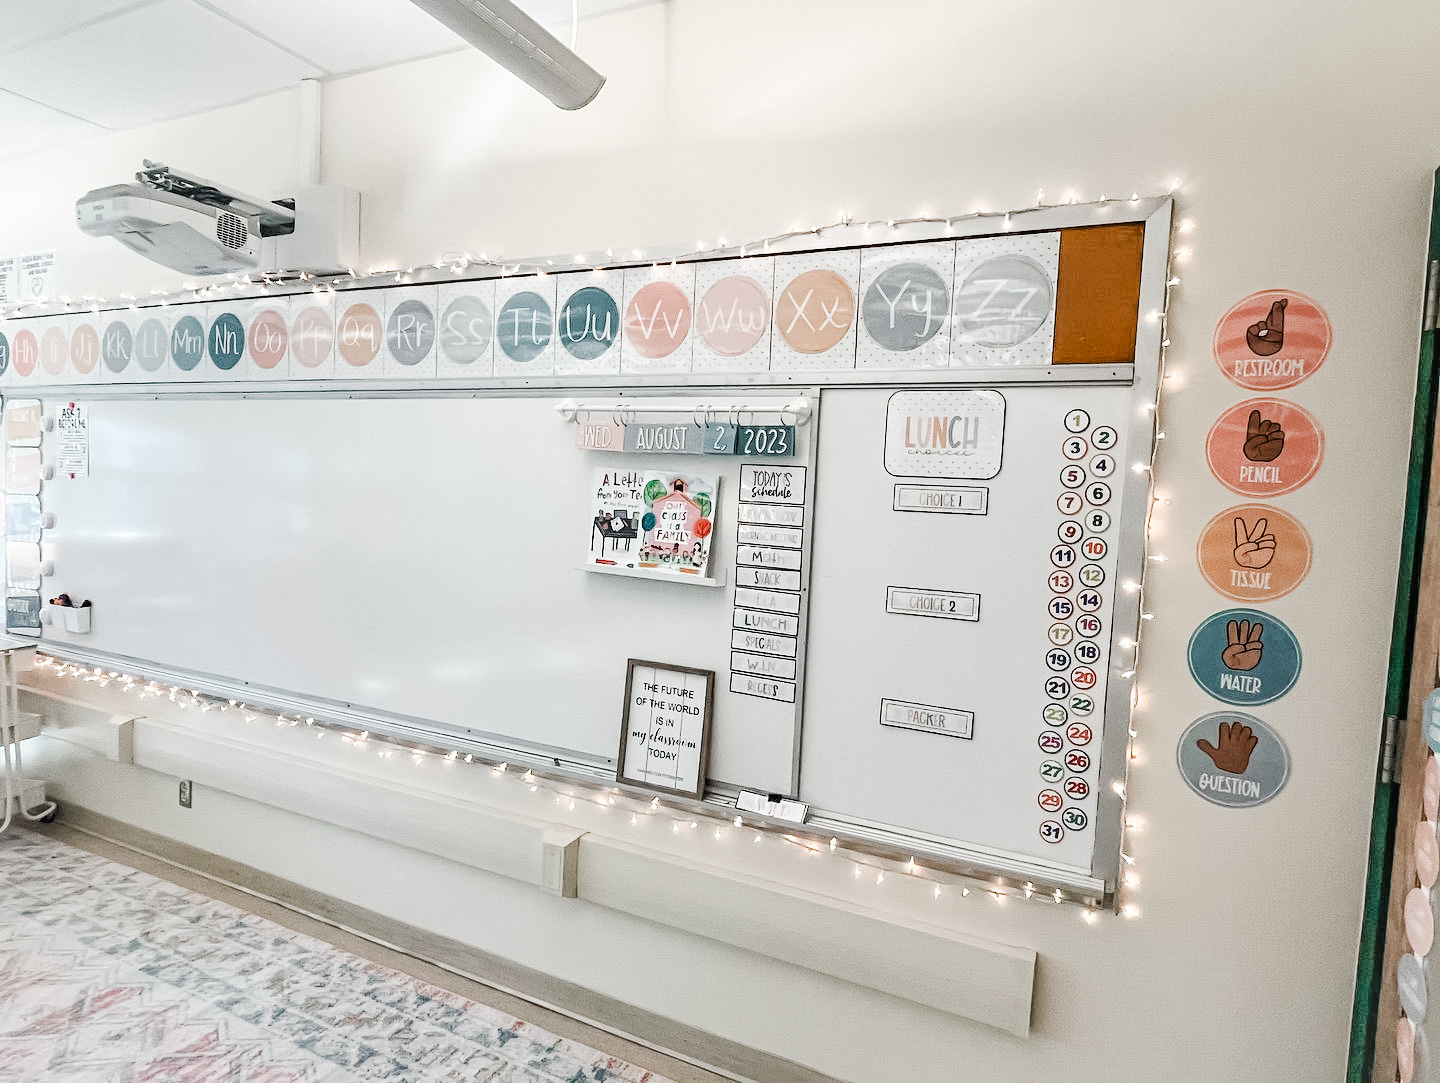 This image shows a classroom using string lights around the whiteboard at the front of the classroom for a cozy classroom effect. 